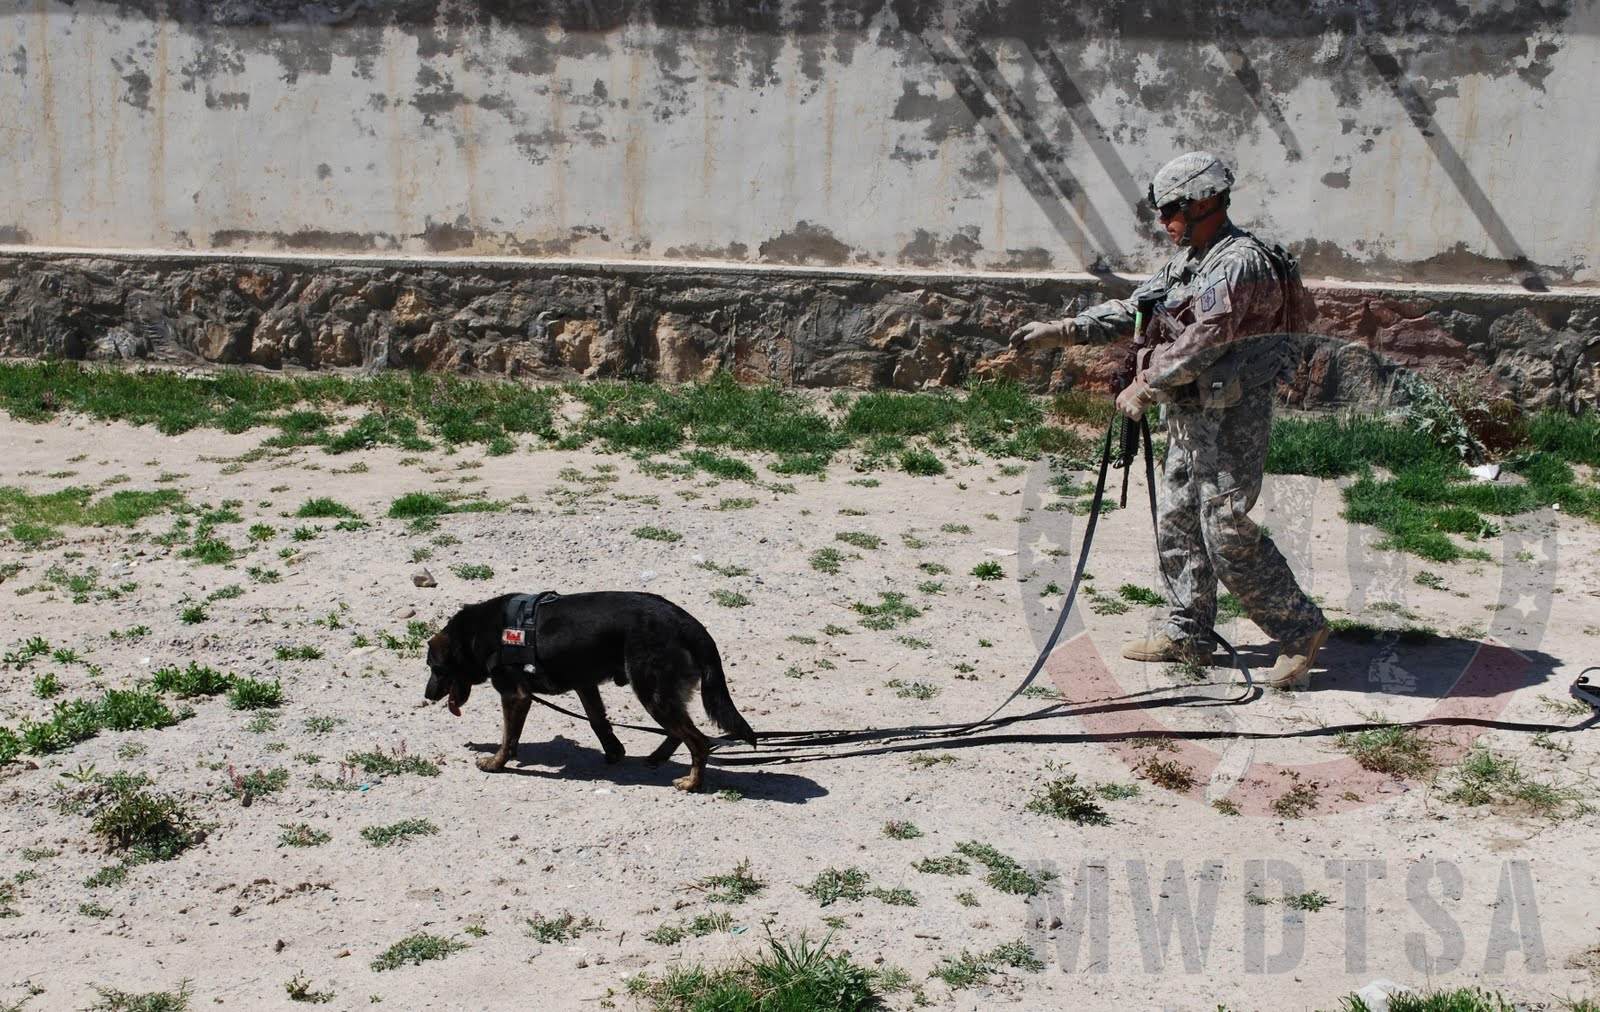 U.S. Army Spc. Adam Zettel, with the 49th Mine Dog Detection Detachment, and Allan, a mine detection dog, search a compound for unexploded ordnance